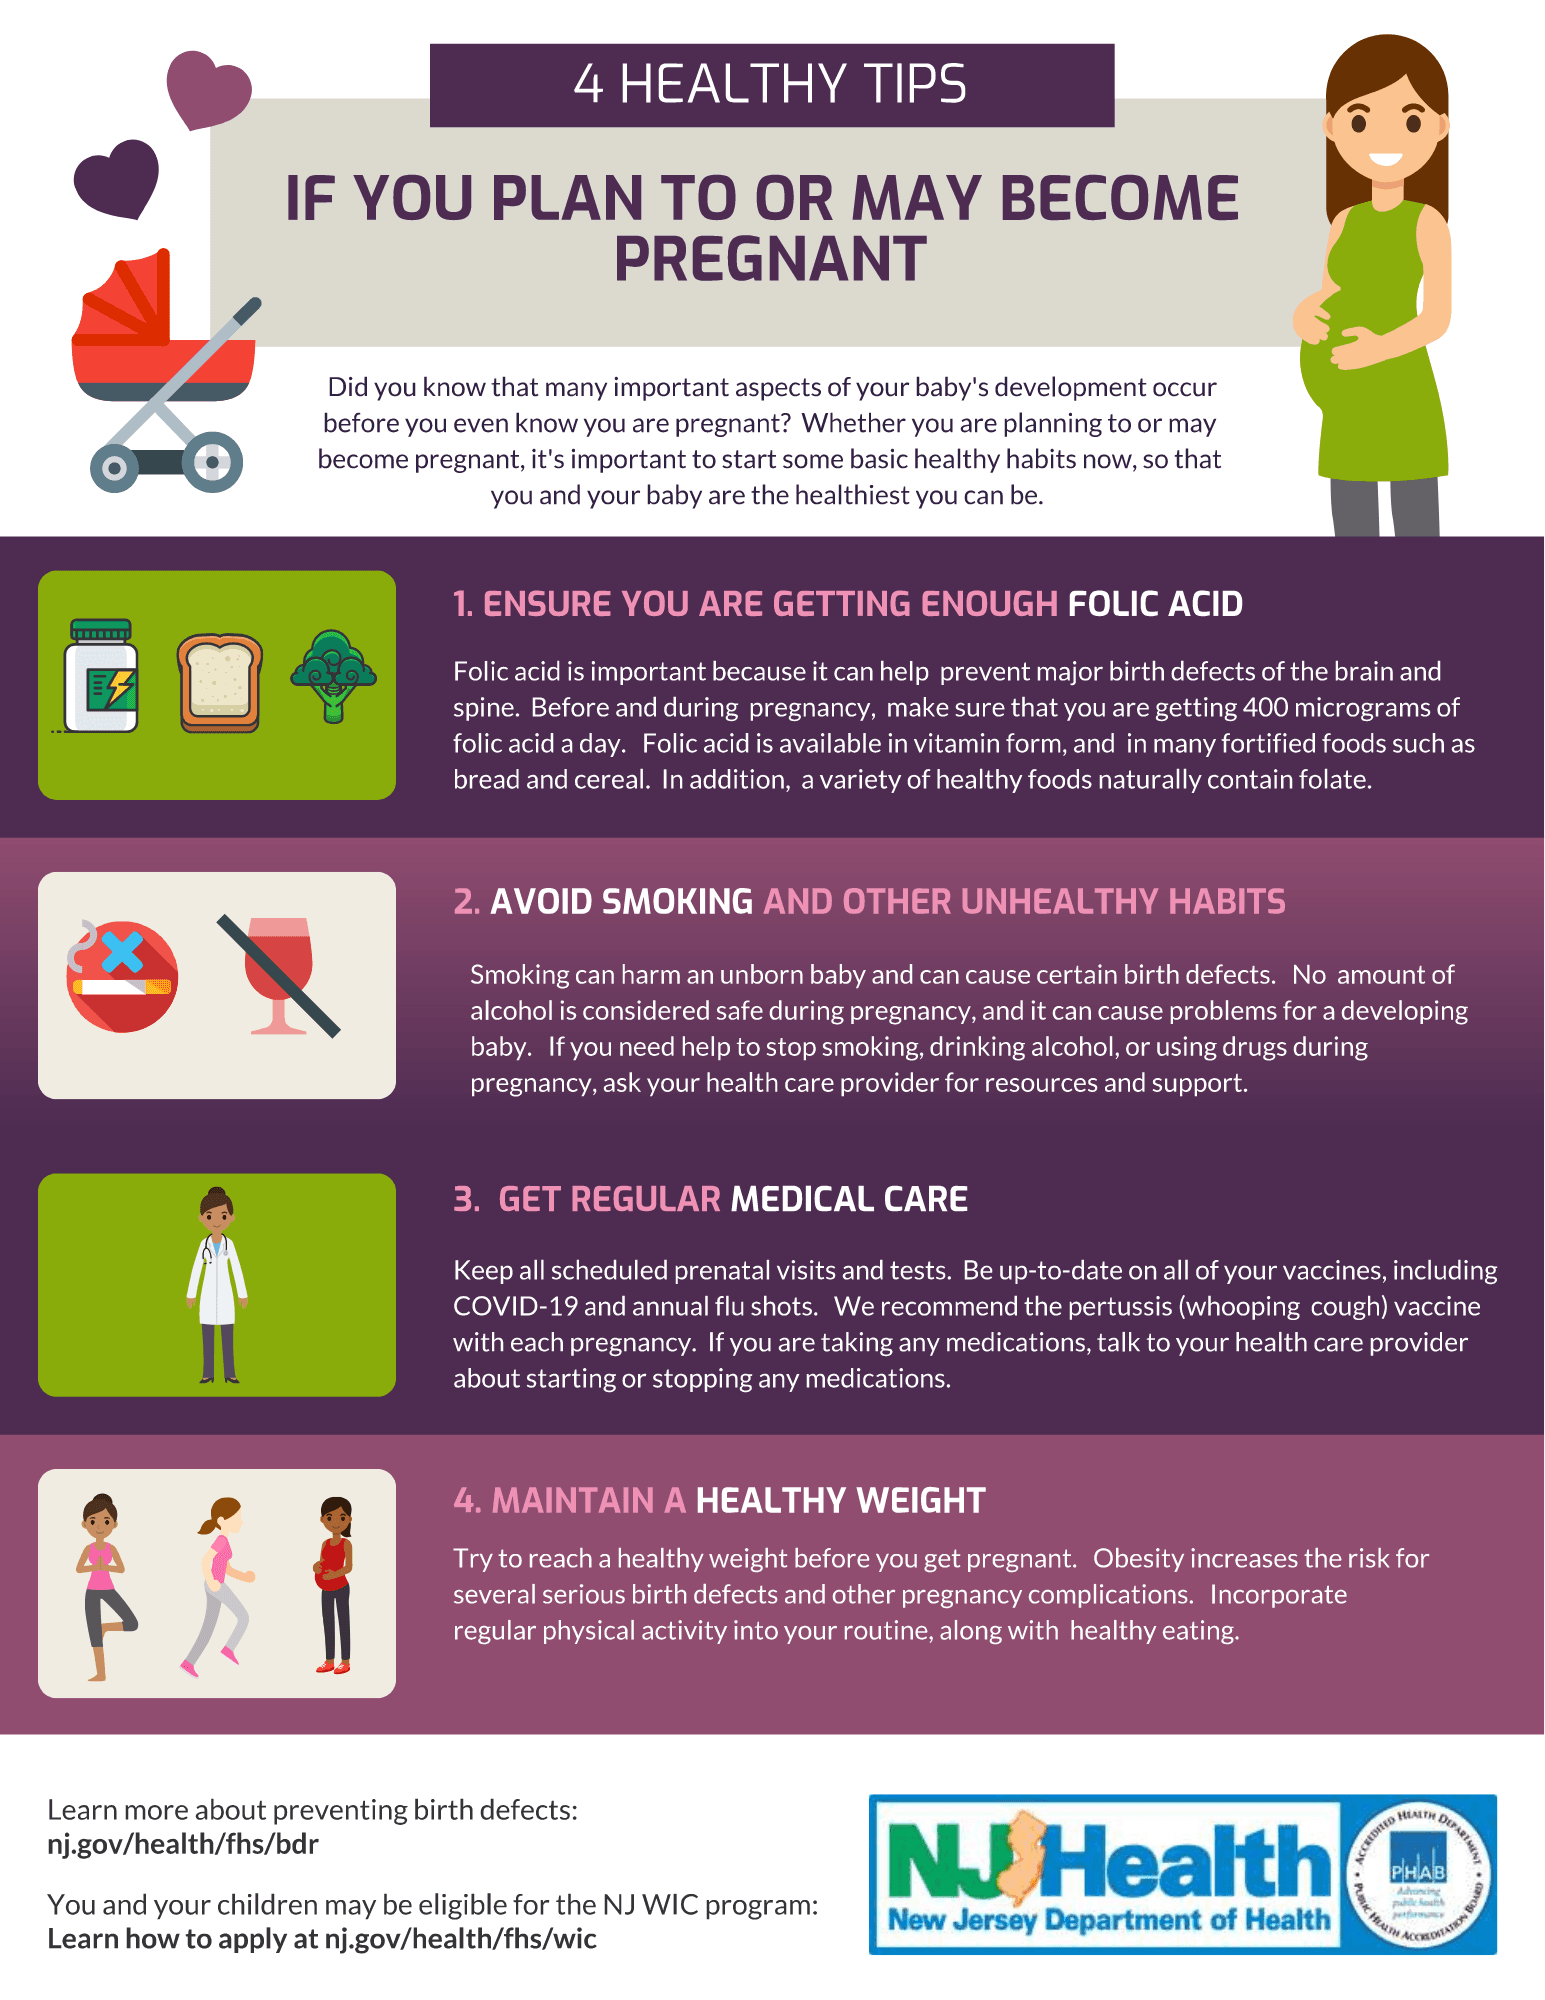 4 Healthy Tips if You Plan To or May Become Pregnant